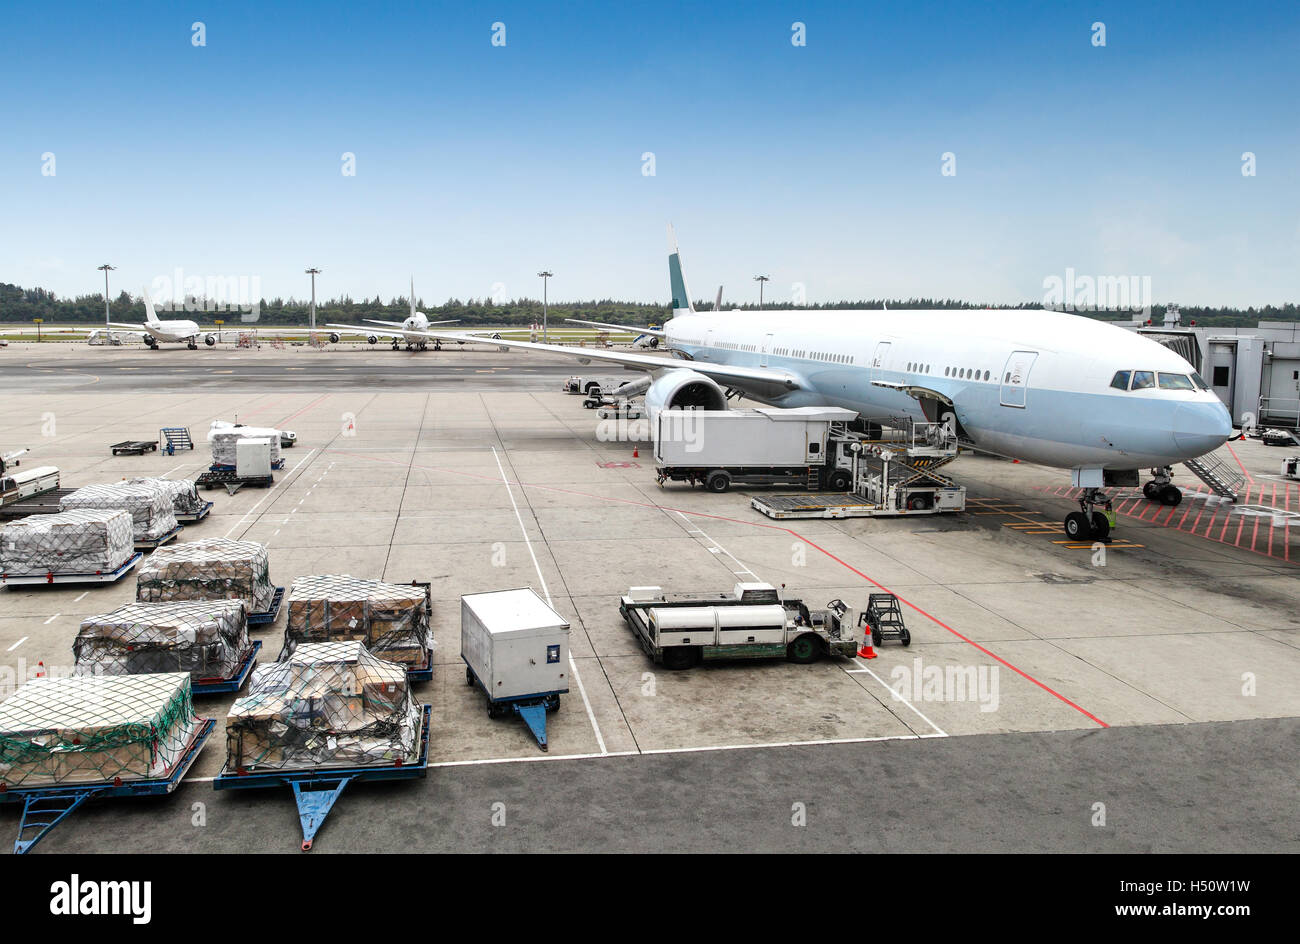 A commercial aircraft being serviced at the terminal of an international airport. Stock Photo